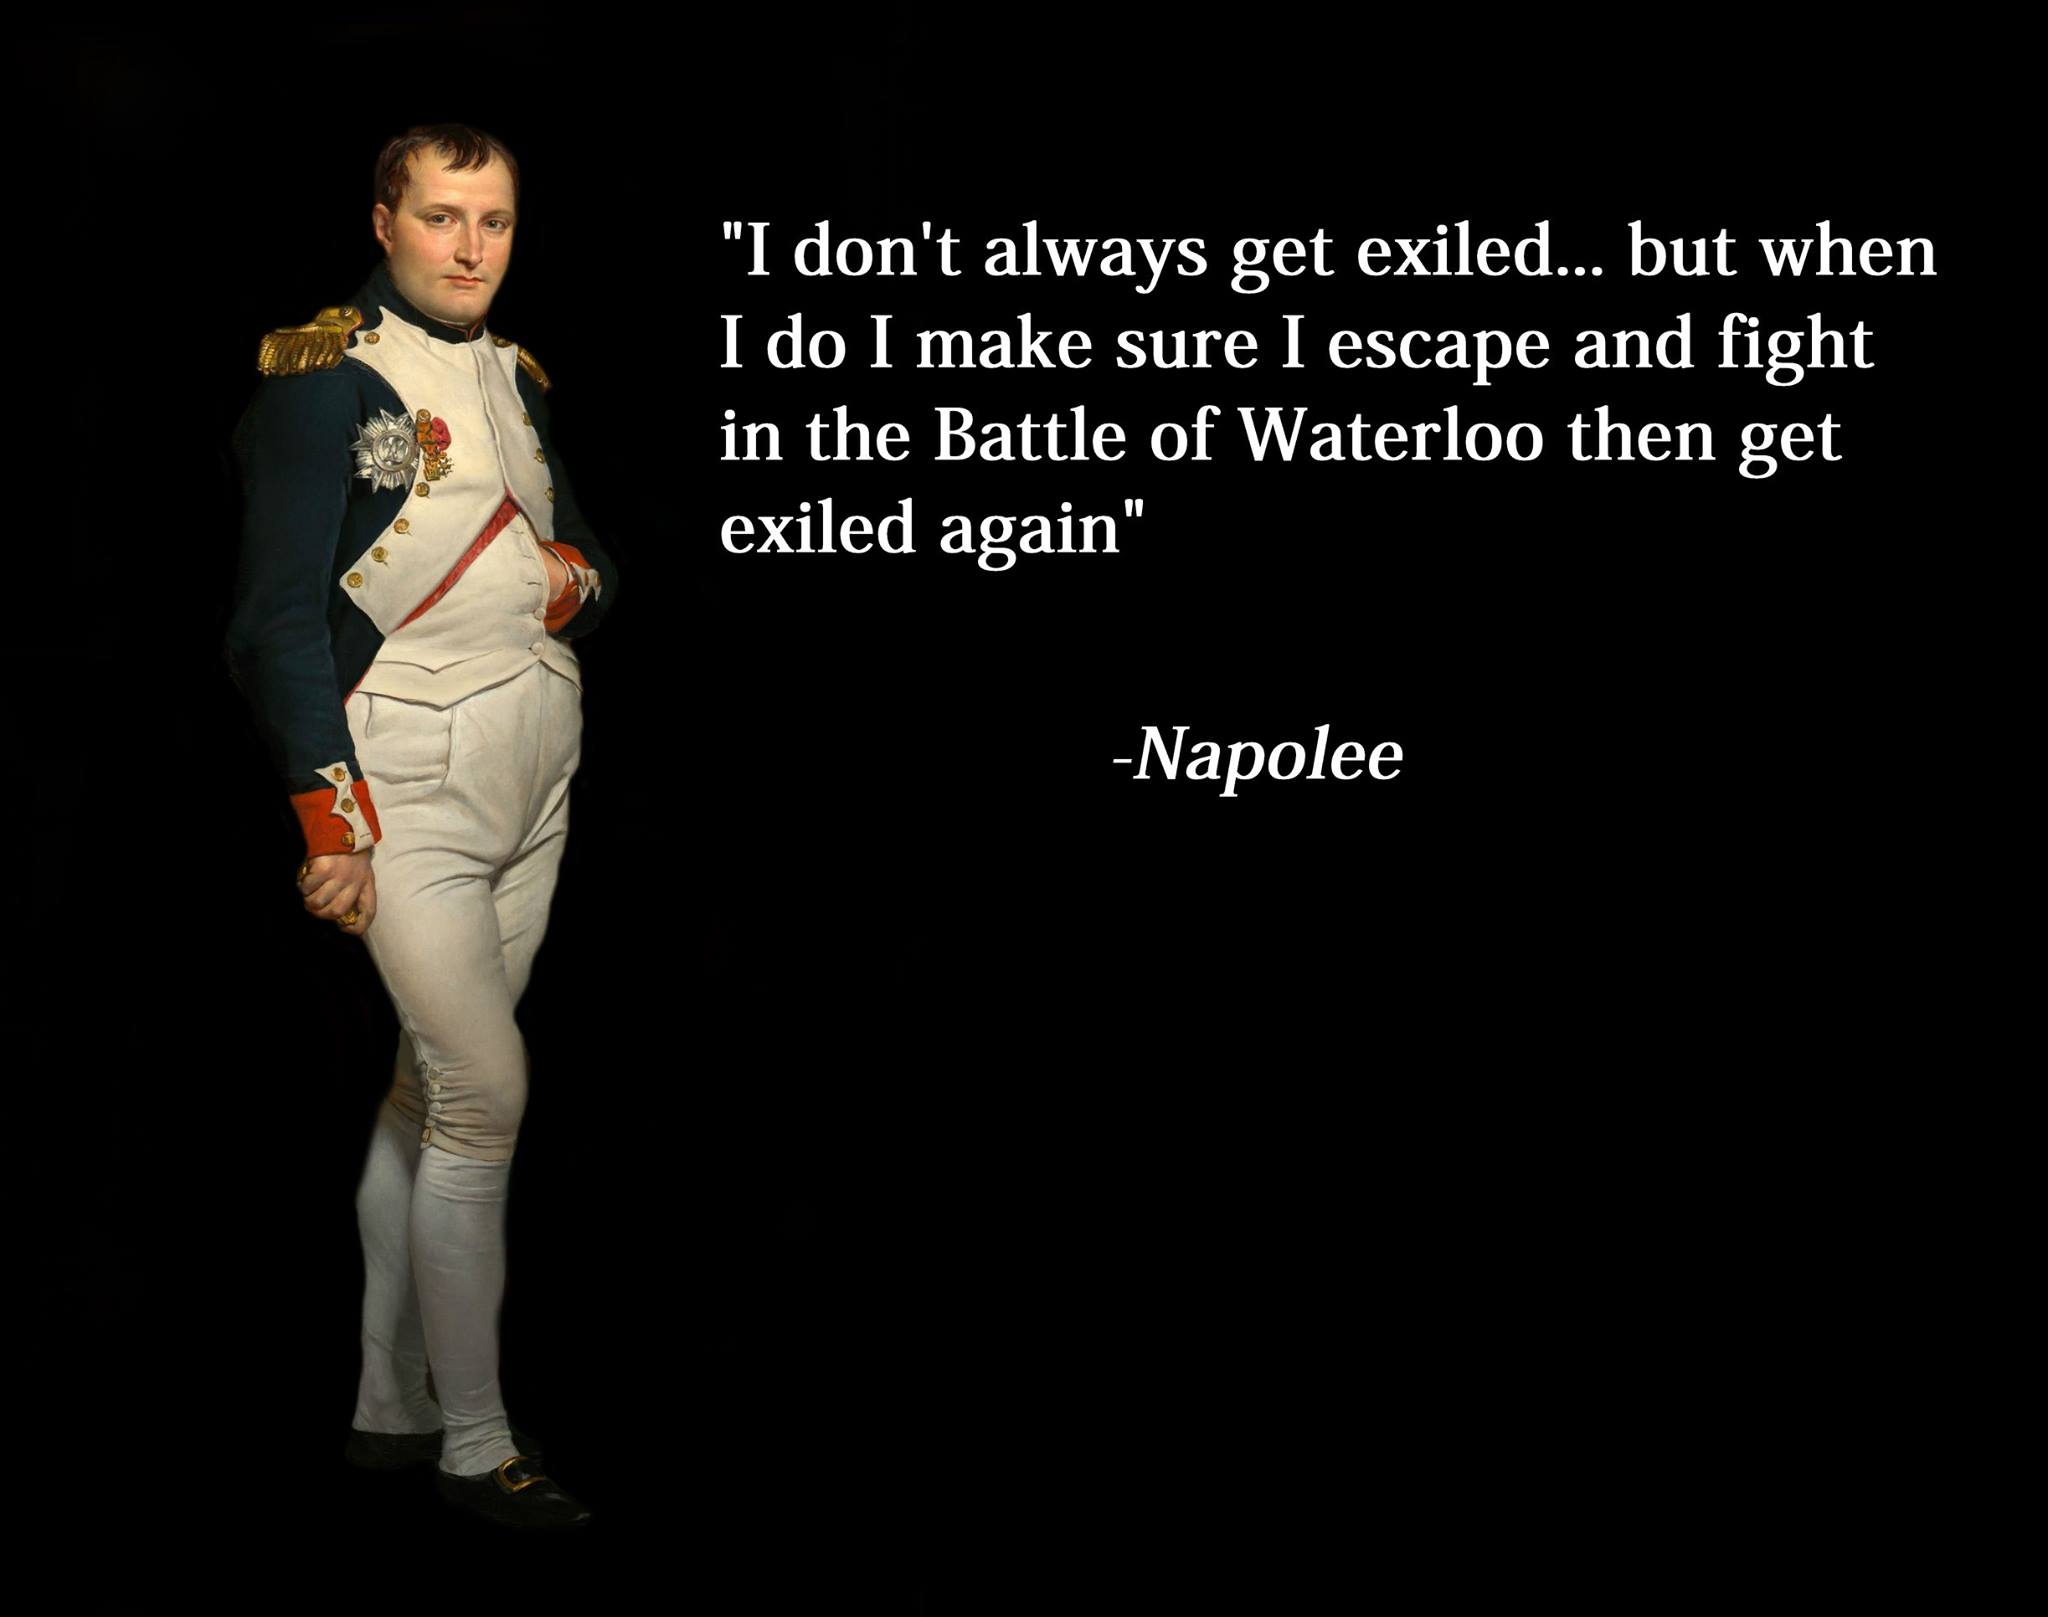 Internet meme - "I don't always get exiled... but when I do I make sure I escape and fight in the Battle of Waterloo then get exiled again" Napolee